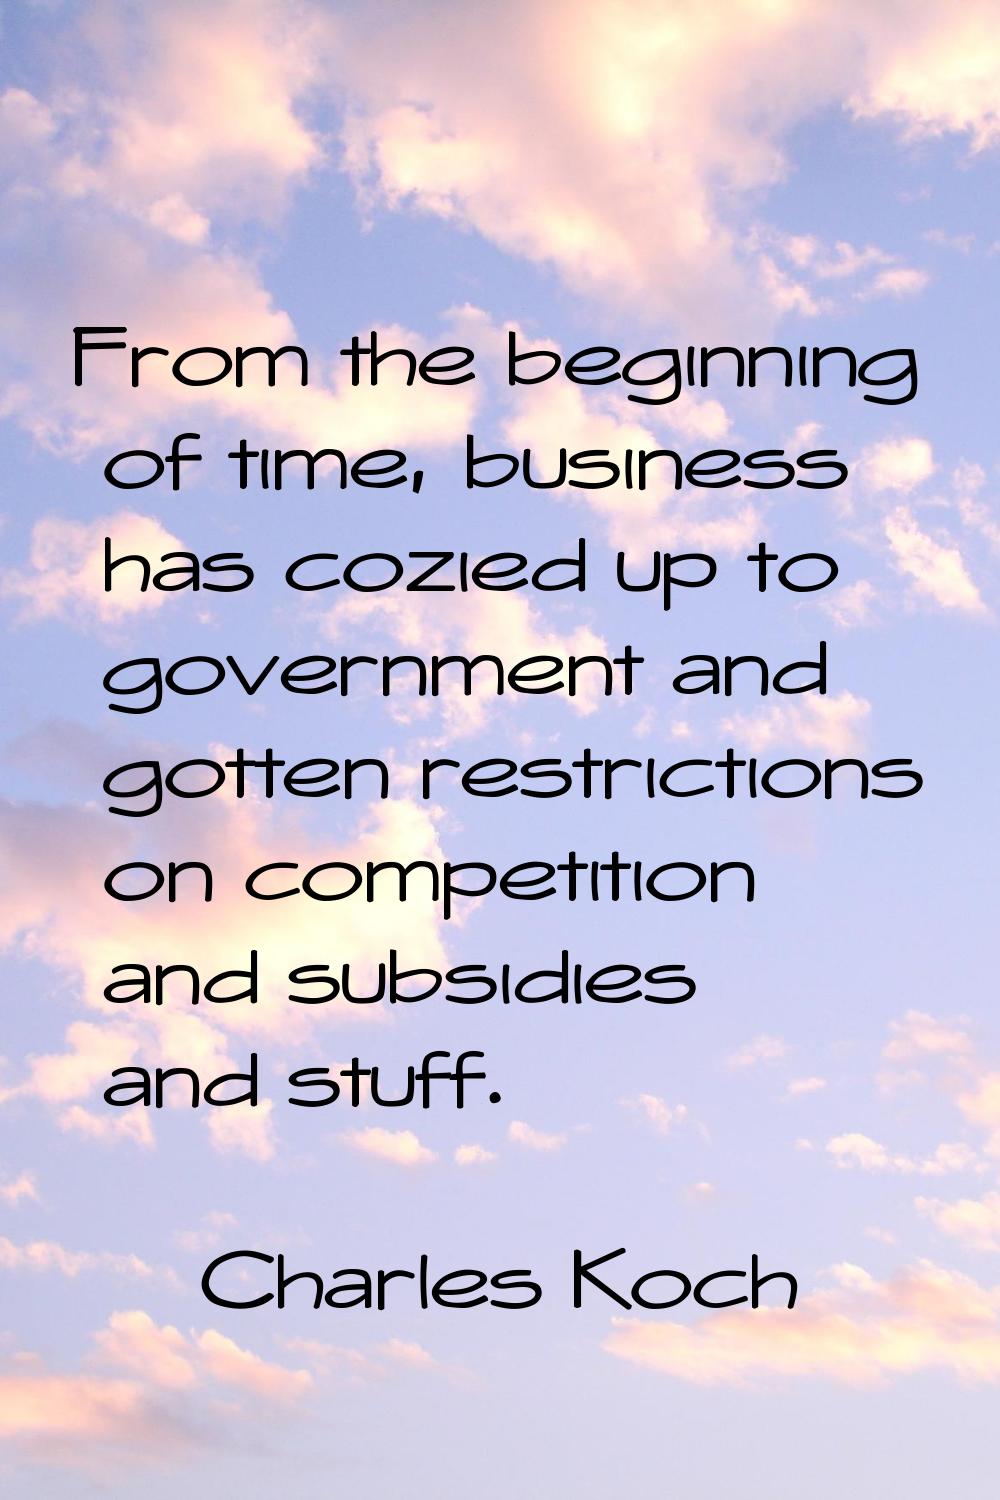 From the beginning of time, business has cozied up to government and gotten restrictions on competi